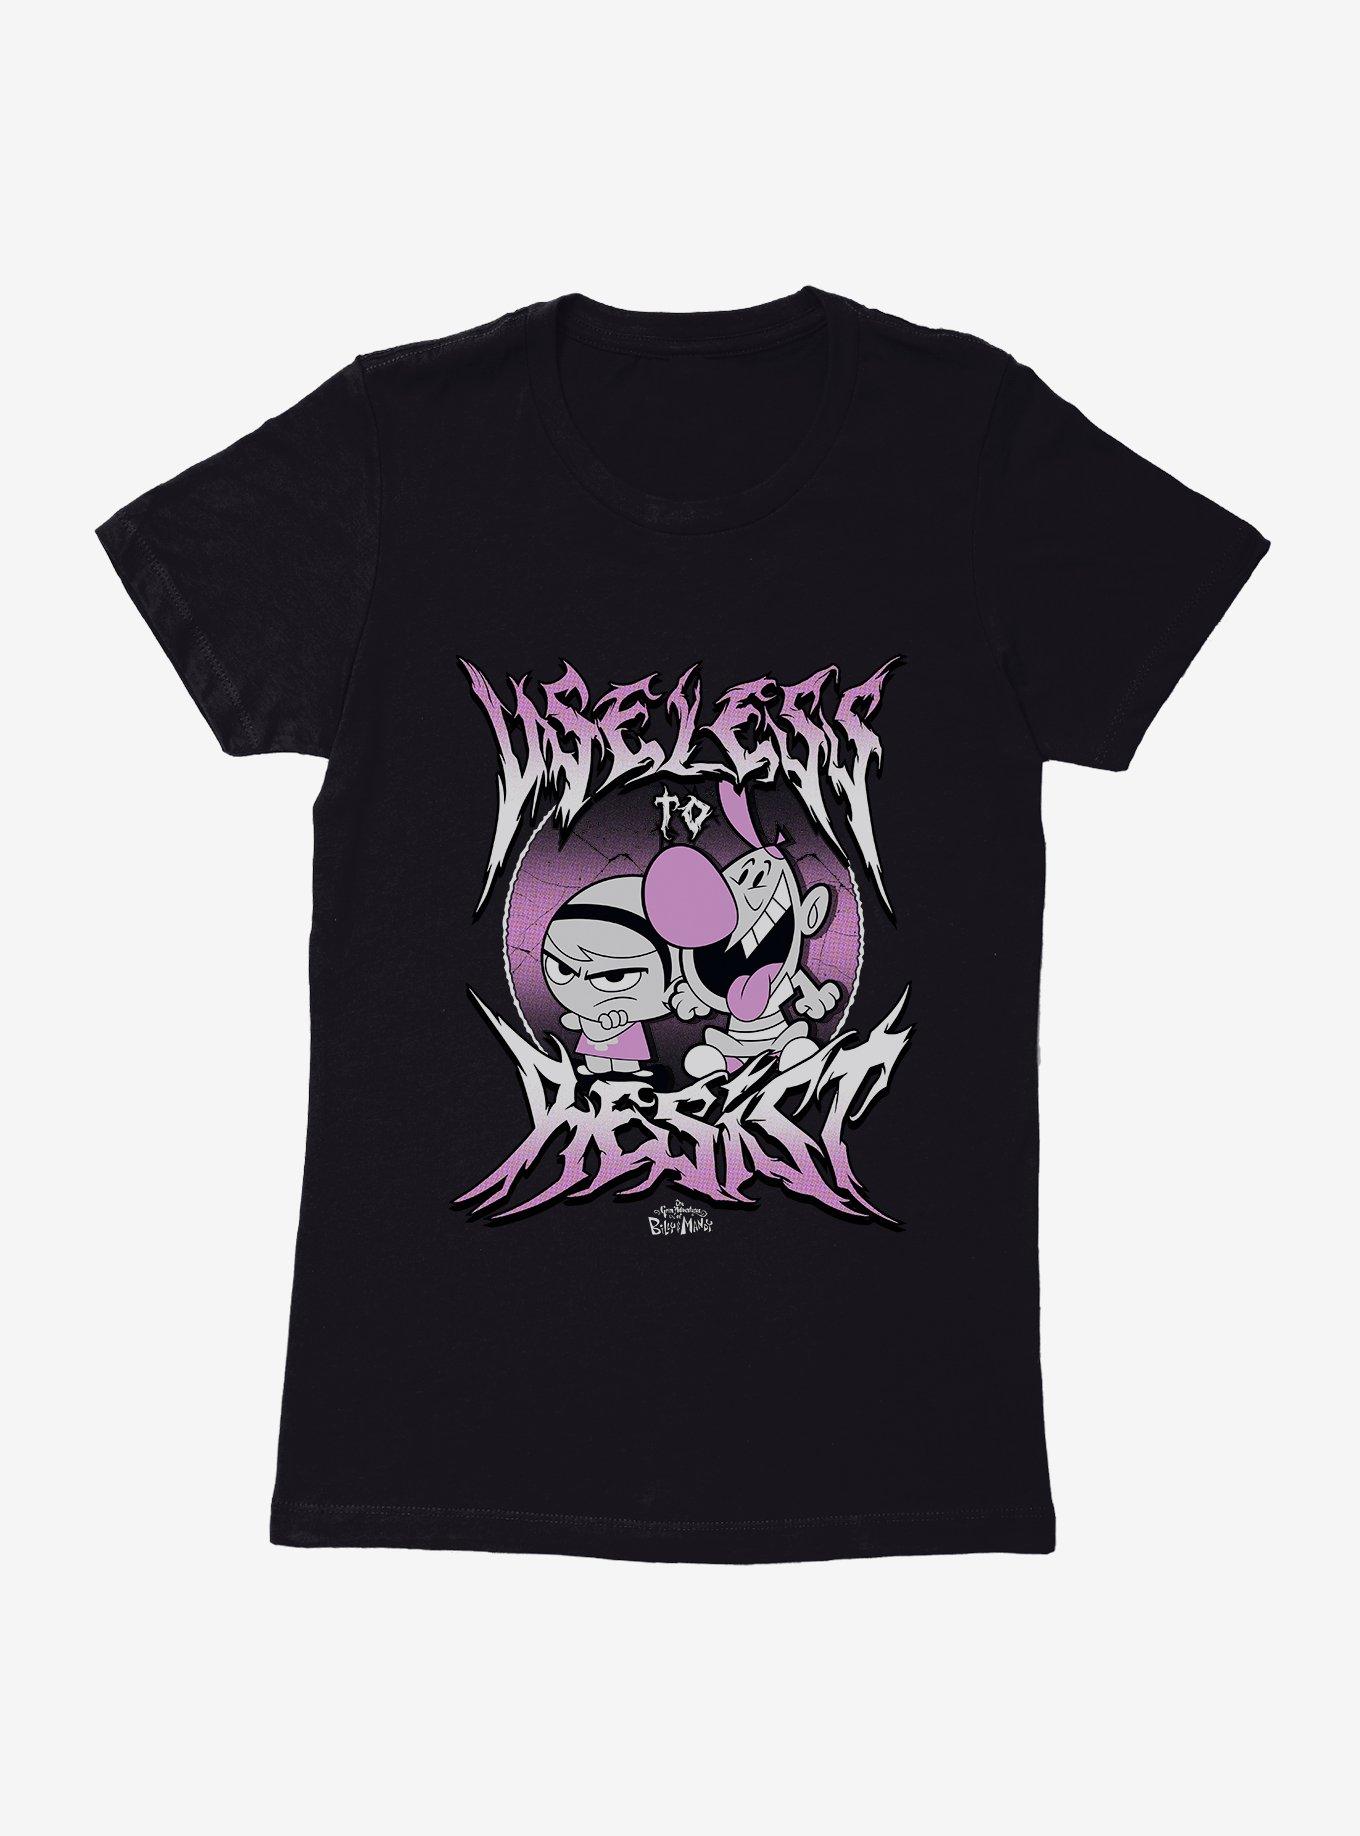 Grim Adventures Of Billy And Mandy Useless To Resist Womens T-Shirt ...